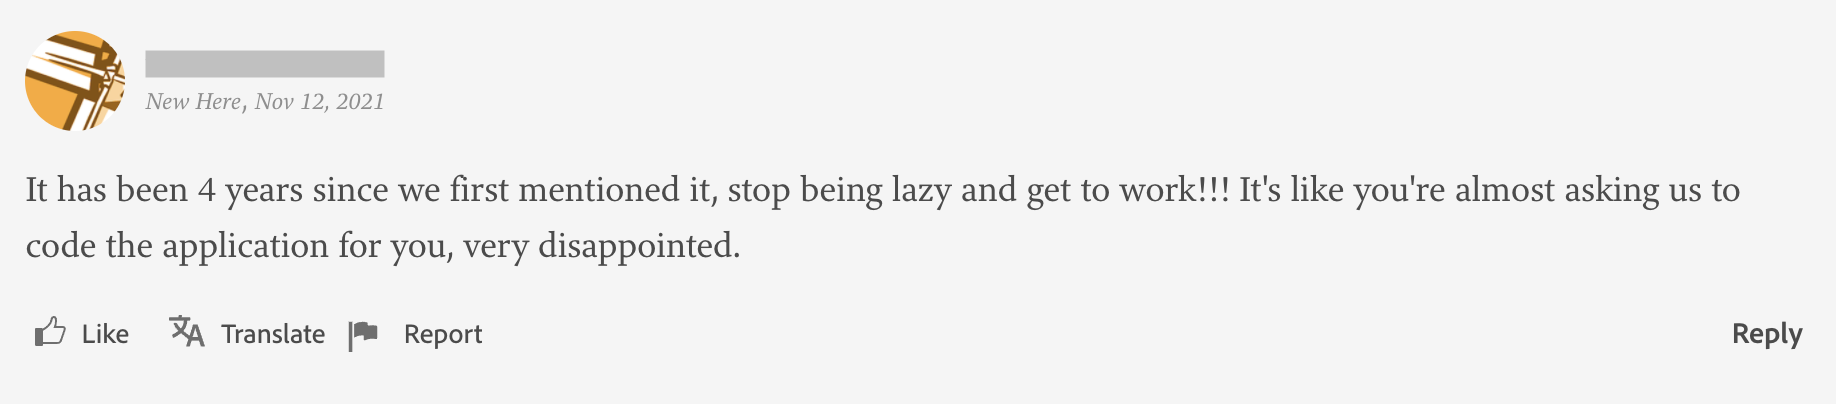 Comment: It has been 4 years since we first mentioned it, stop being lazy and get to work!